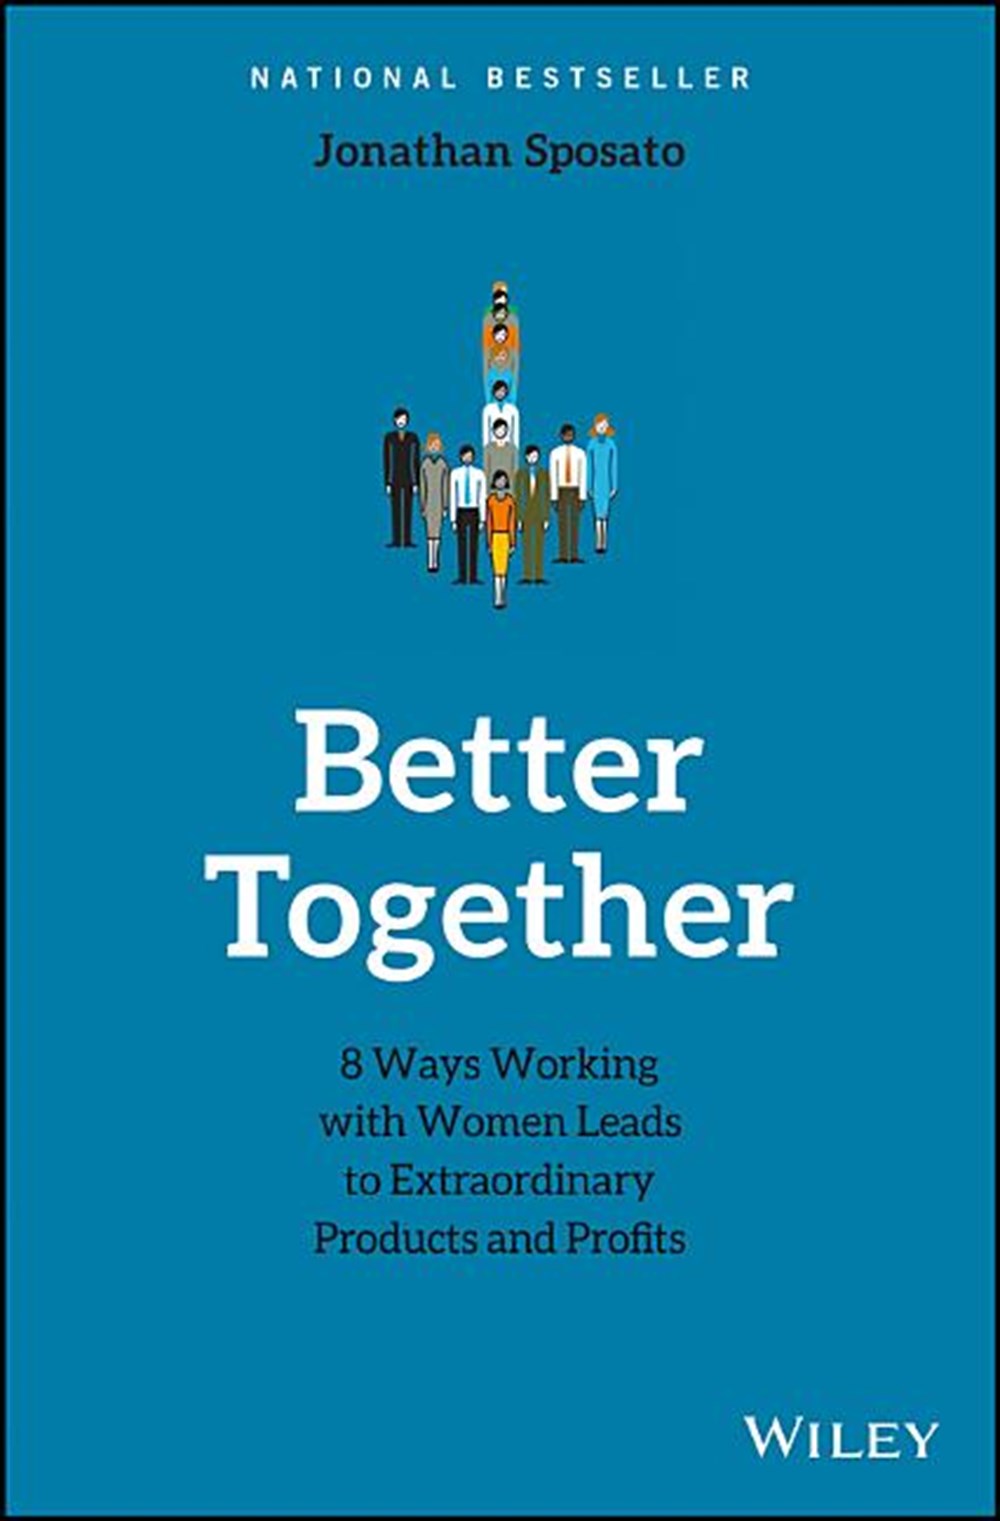 Better Together 8 Ways Working with Women Leads to Extraordinary Products and Profits